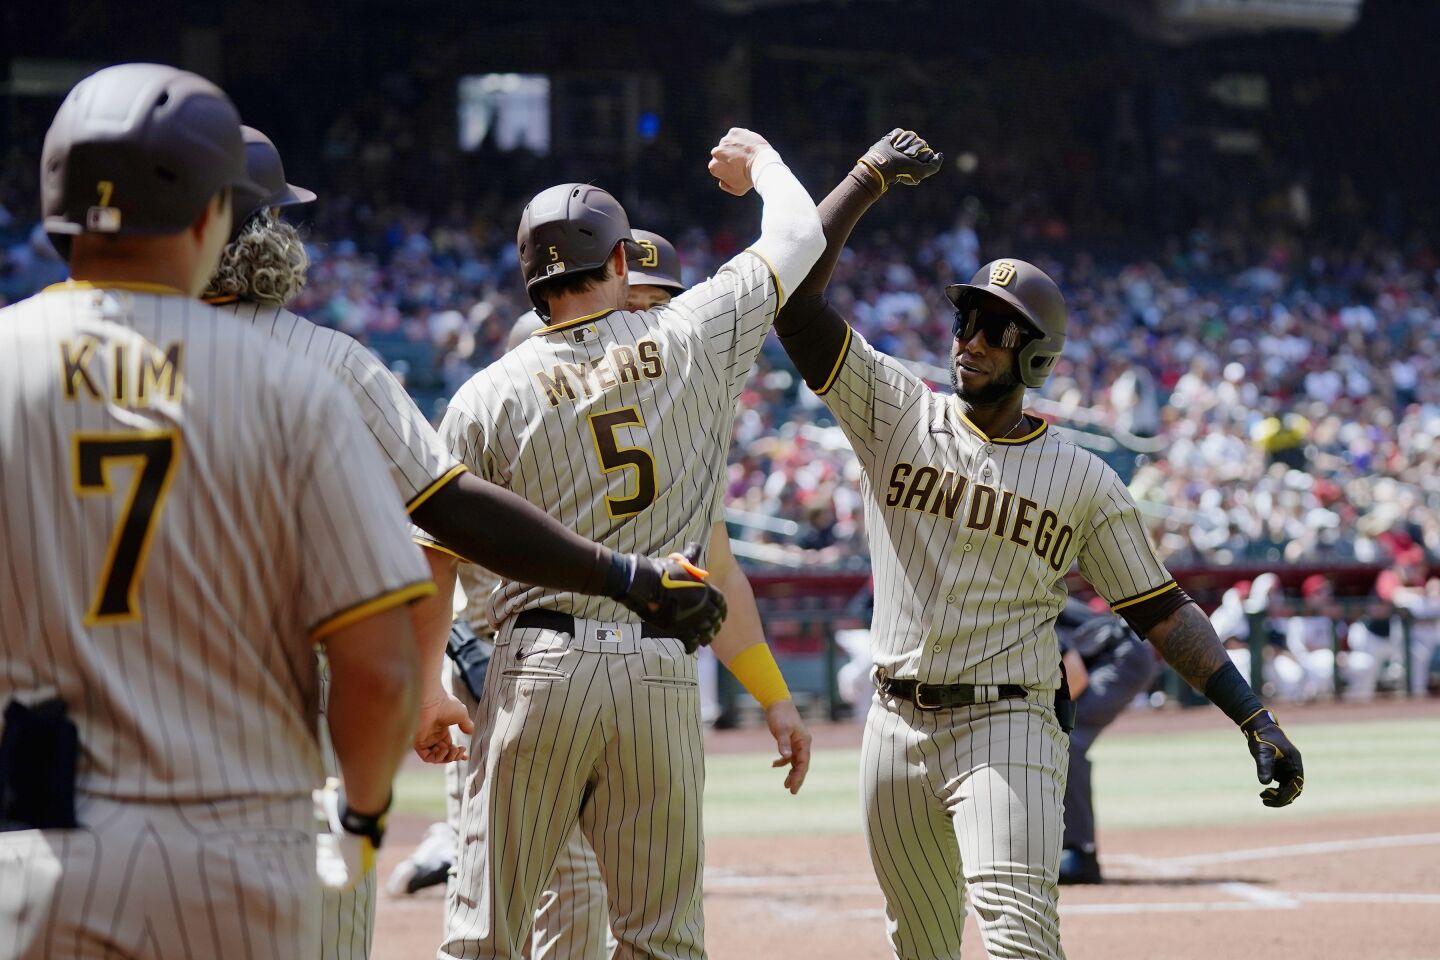 San Diego Padres (3-1, 1st in NL West)After losing on a walk-off homer on opening day, the Padres won the next three in Arizona and outscored the Diamondbacks, 20-11, in the four-game series. The Padres lost 11 of 19 last year to the Giants.